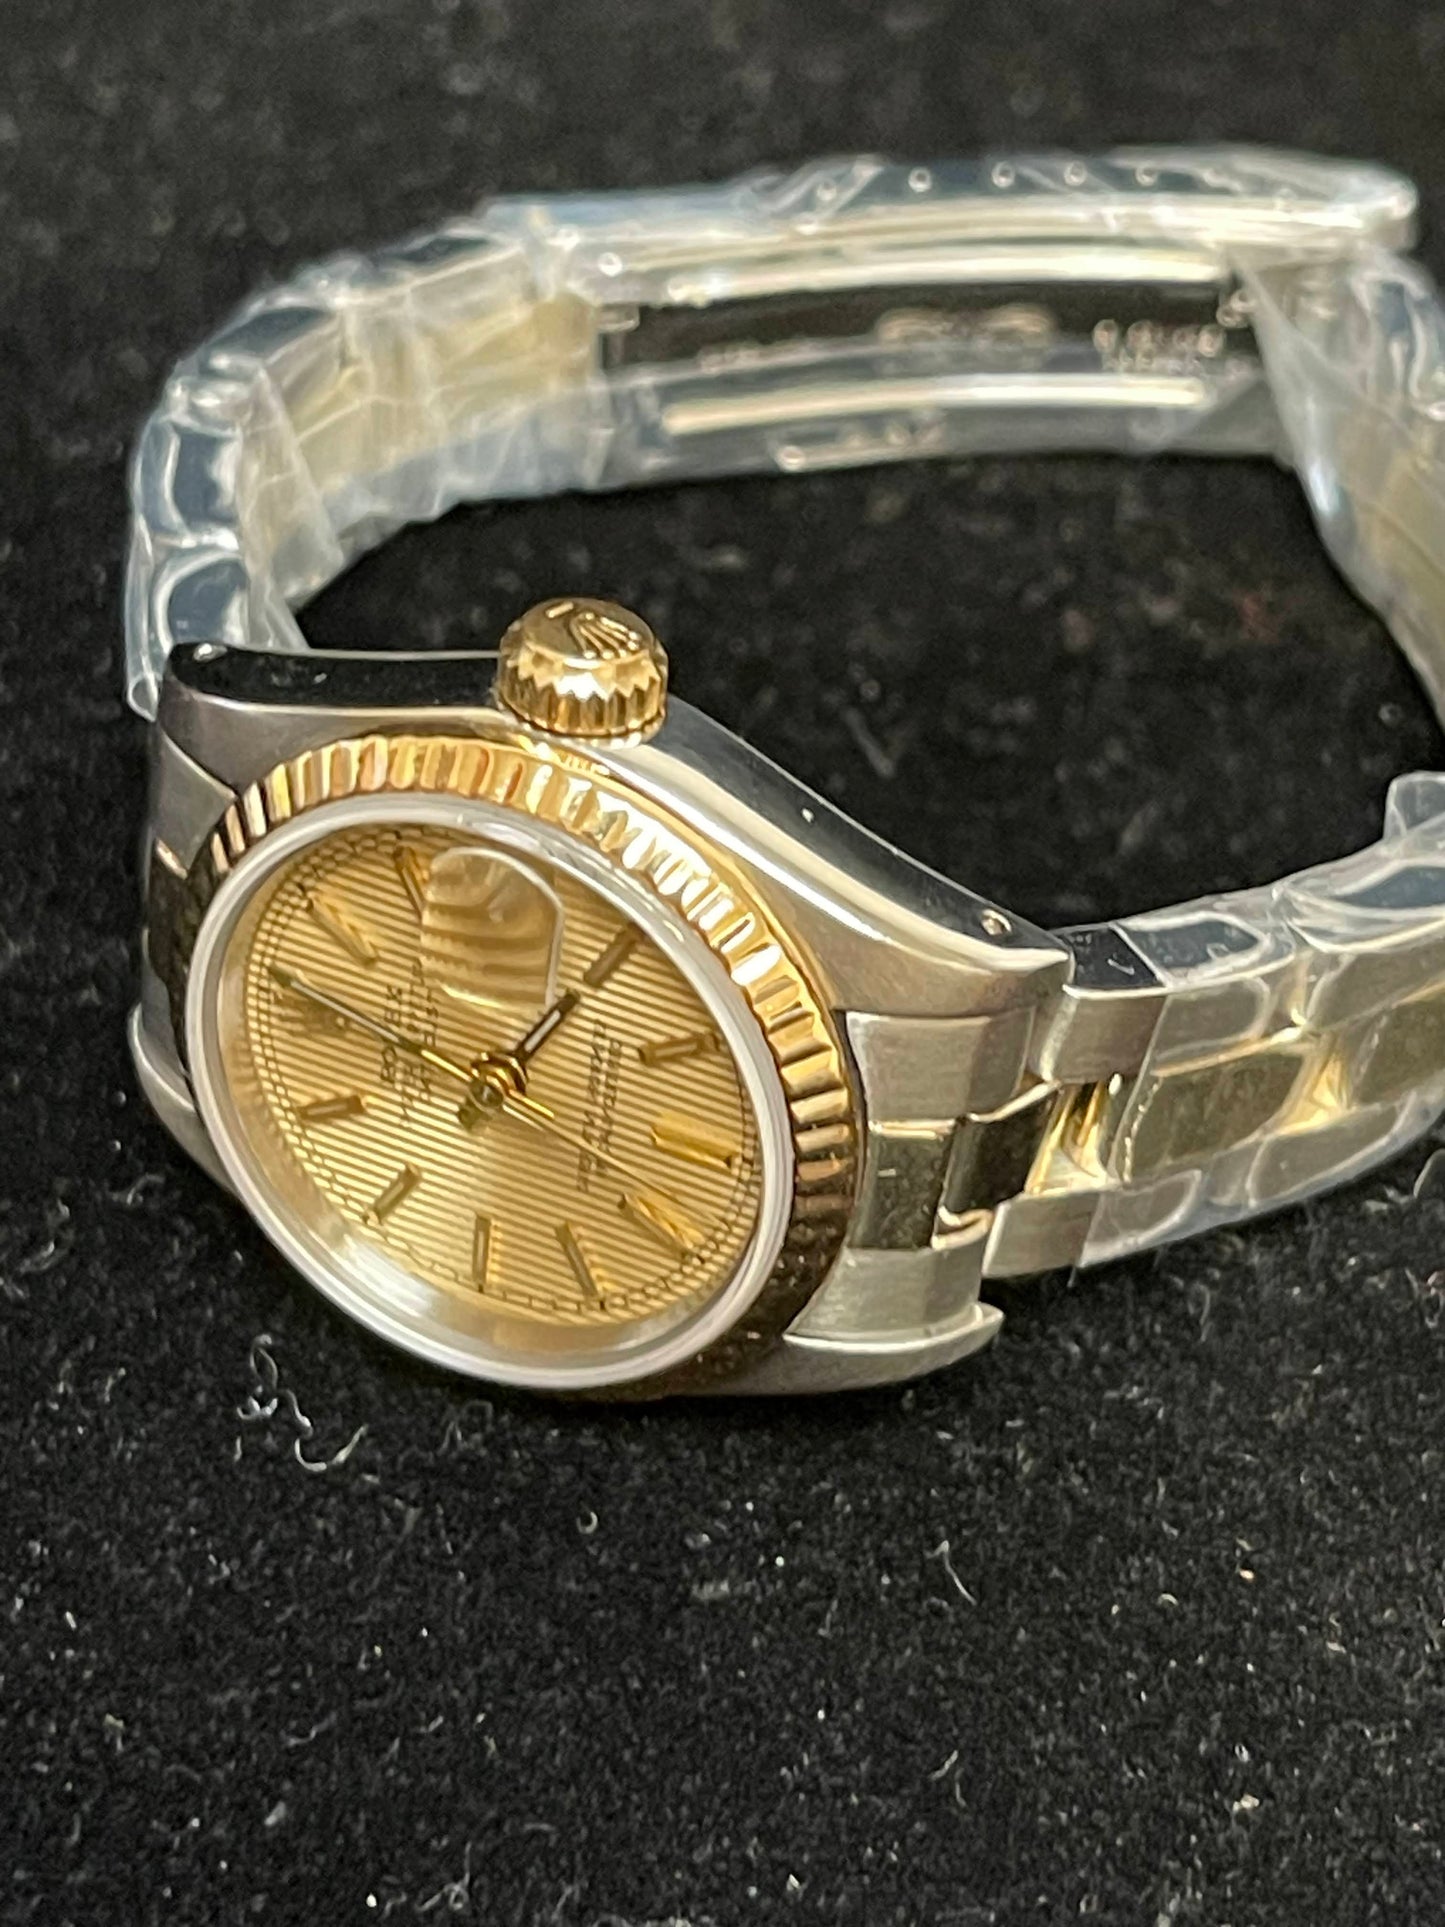 1986 Rolex Ladies Datejust 69173 Champagne Linen Dial TT Oyster No Papers 26mm